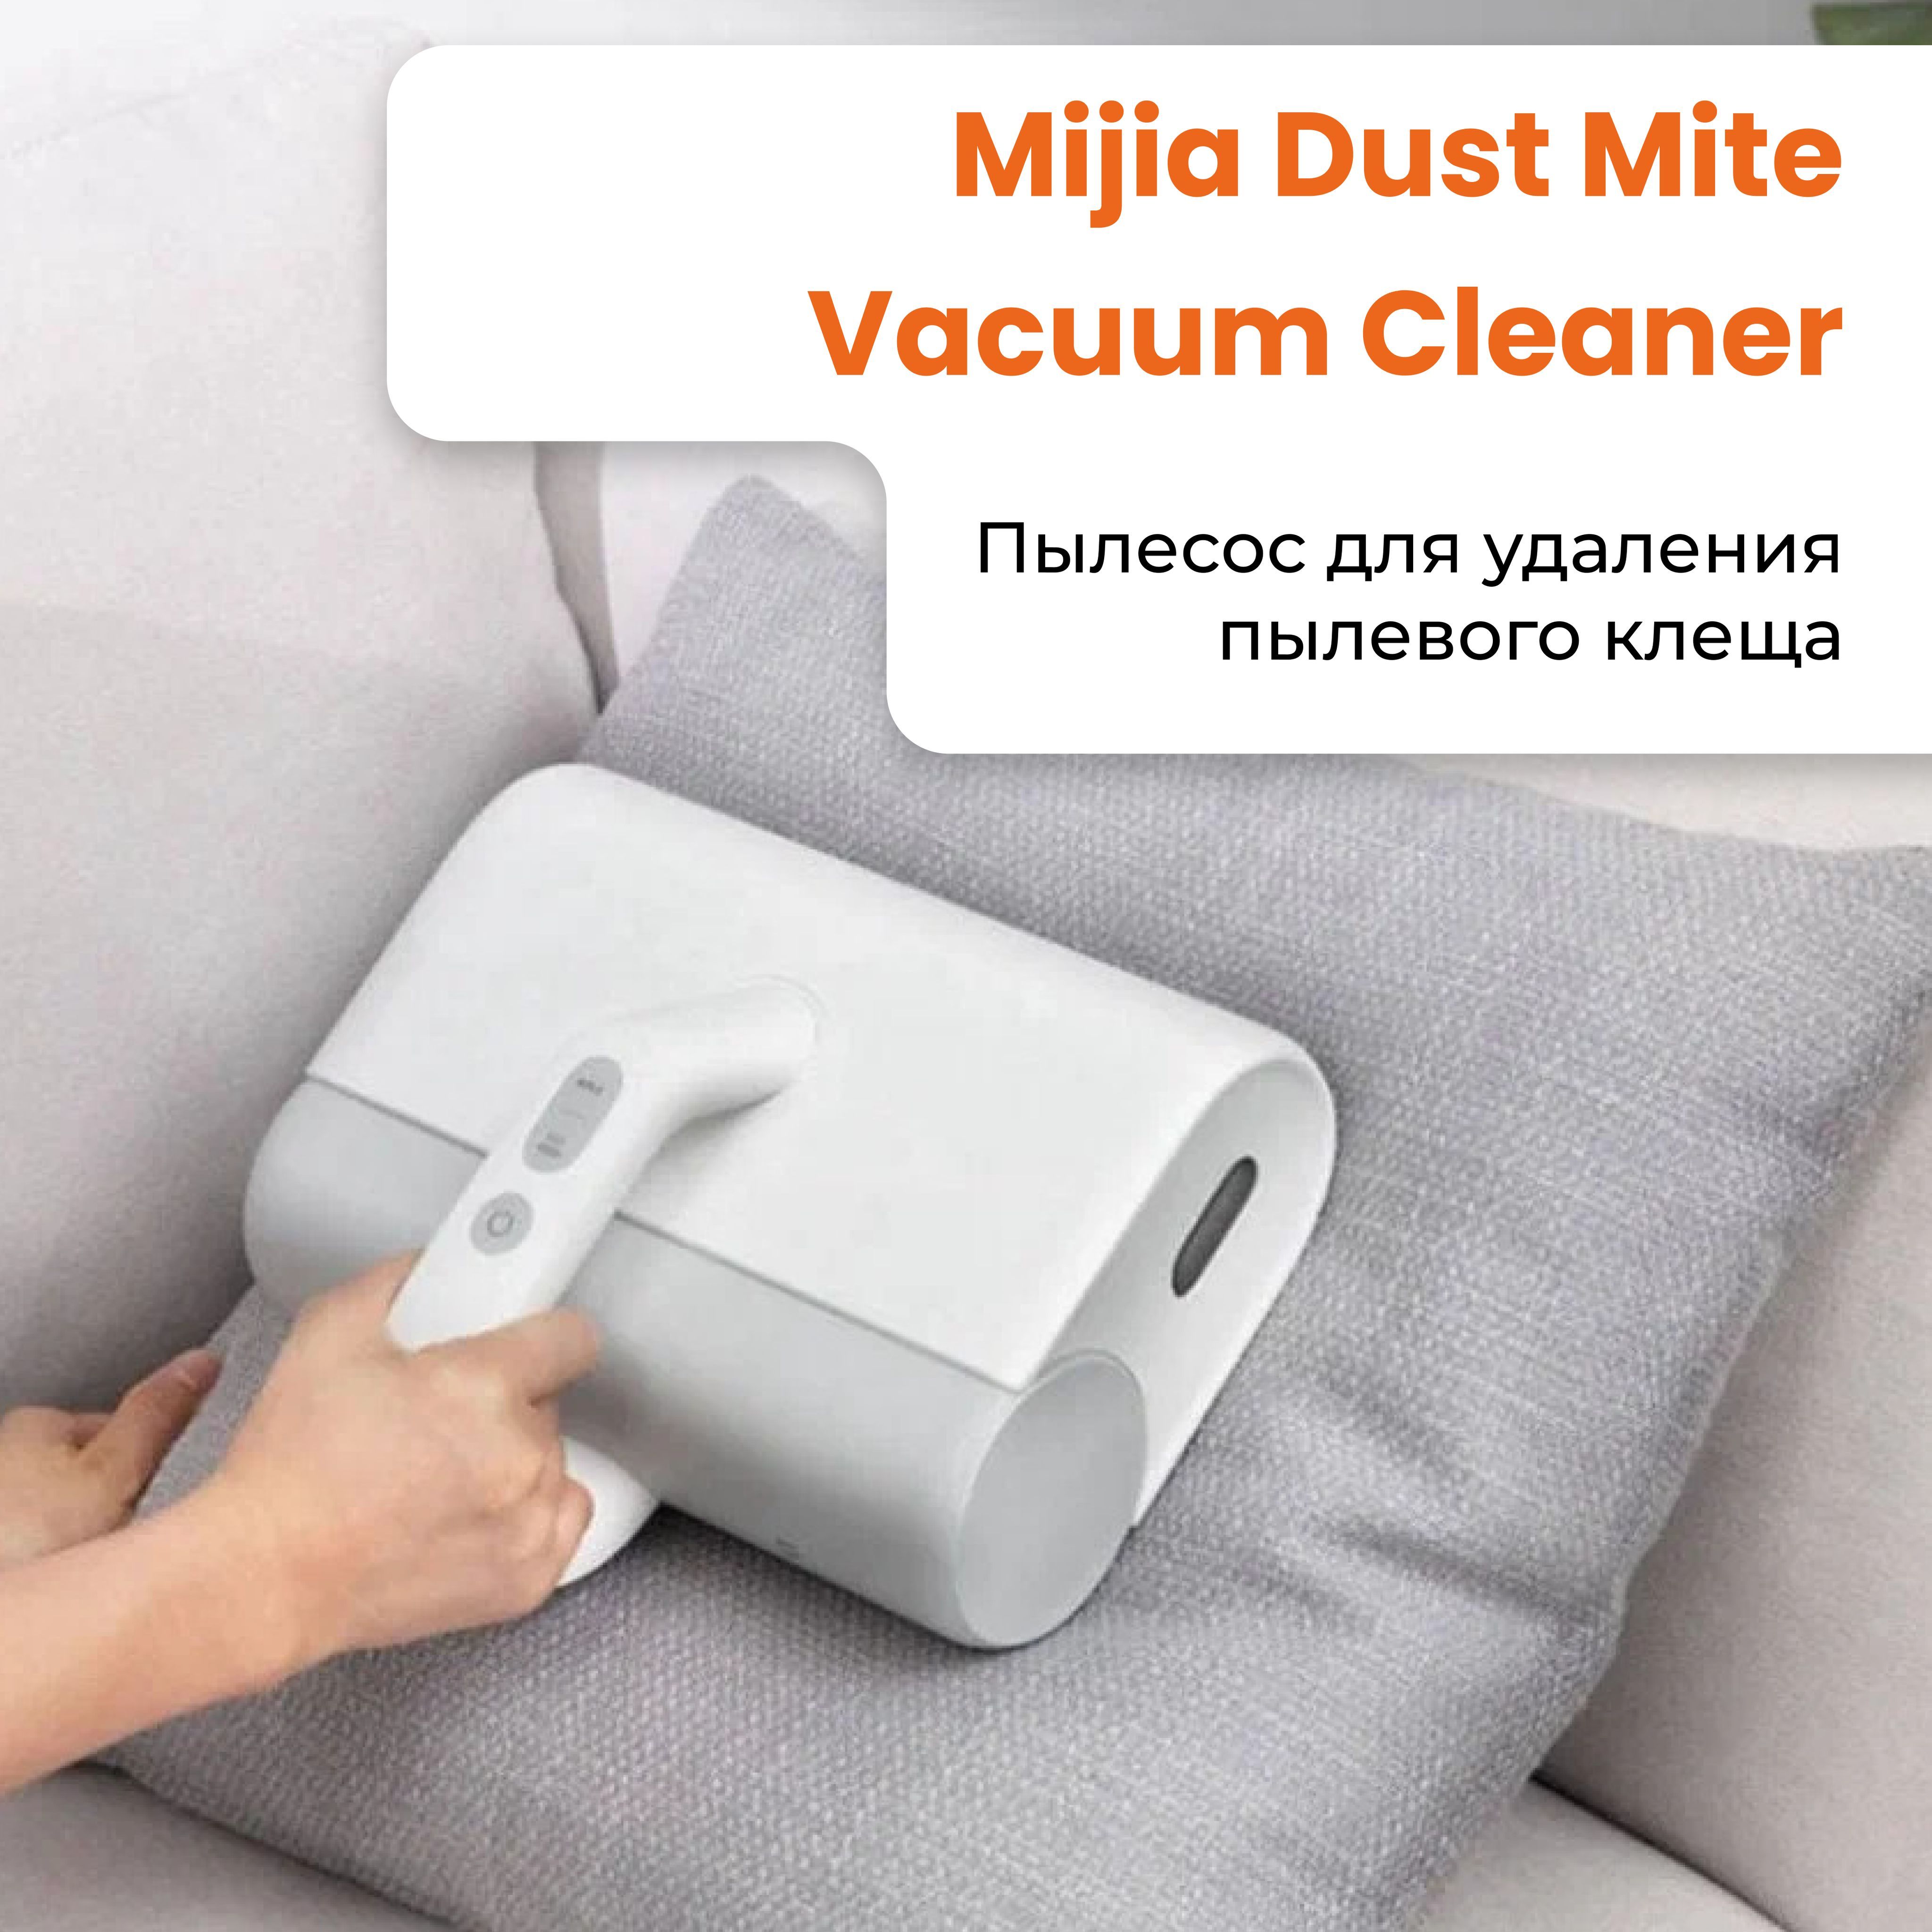 Mjcmy01dy dust mite vacuum cleaner. Xiaomi mjcmy01dy. Пылесос Xiaomi (mjcmy01dy). Xiaomi Dust Mite Vacuum. Xiaomi Dust Mite Vacuum вилка.